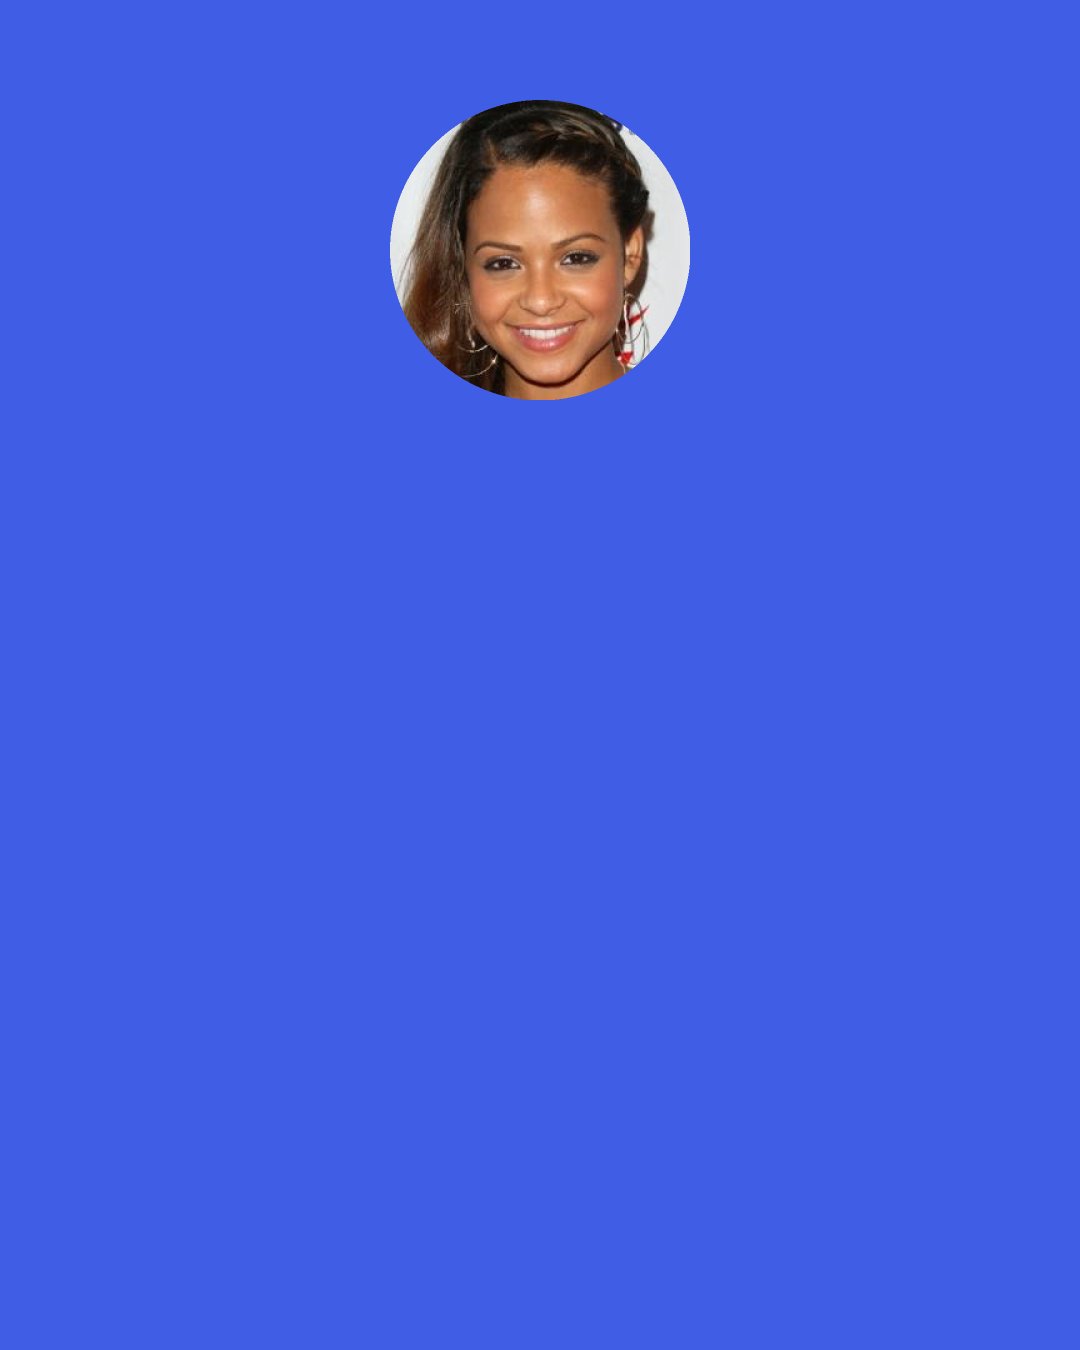 Christina Milian: I guess NBC must have noticed that one of my main staples is social media. So, when they approached me for The Voice, I thought "Why not be the first one to do it?"